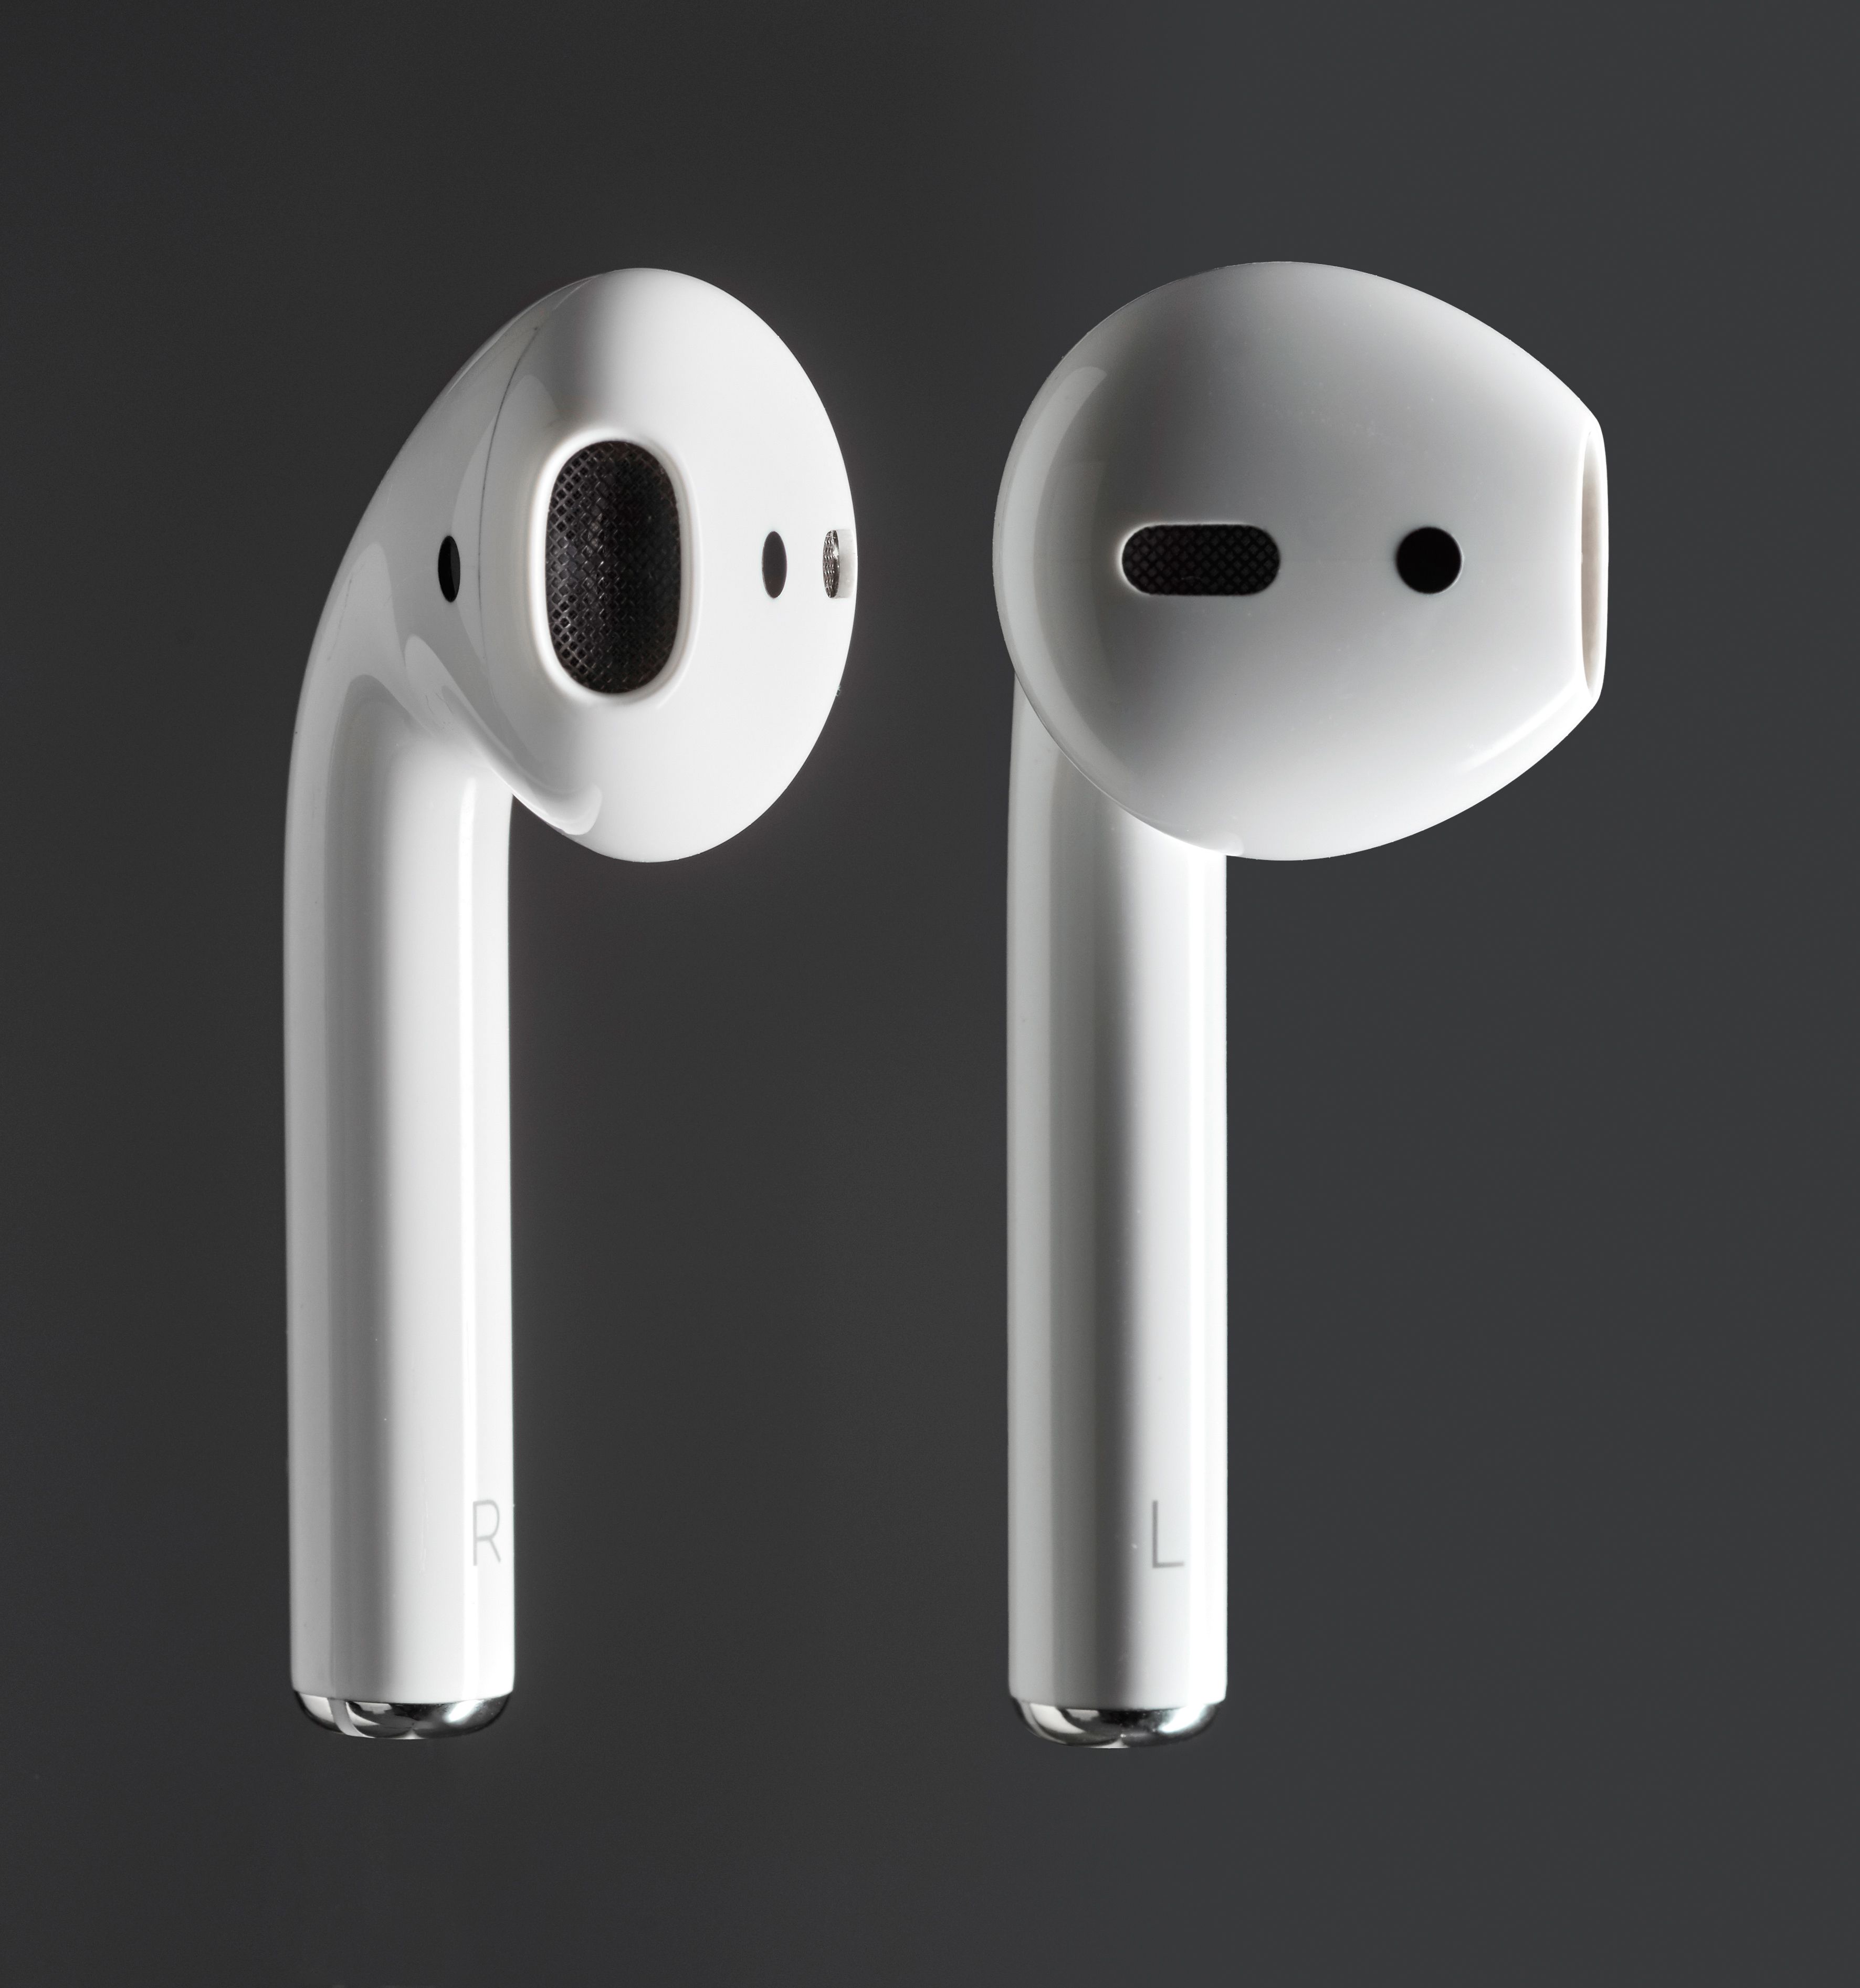 Аккумулятор наушники airpods. Apple AIRPODS Pro 2 сенсор. Air pods 3. Air pods a2190. AIRPODS последняя версия.